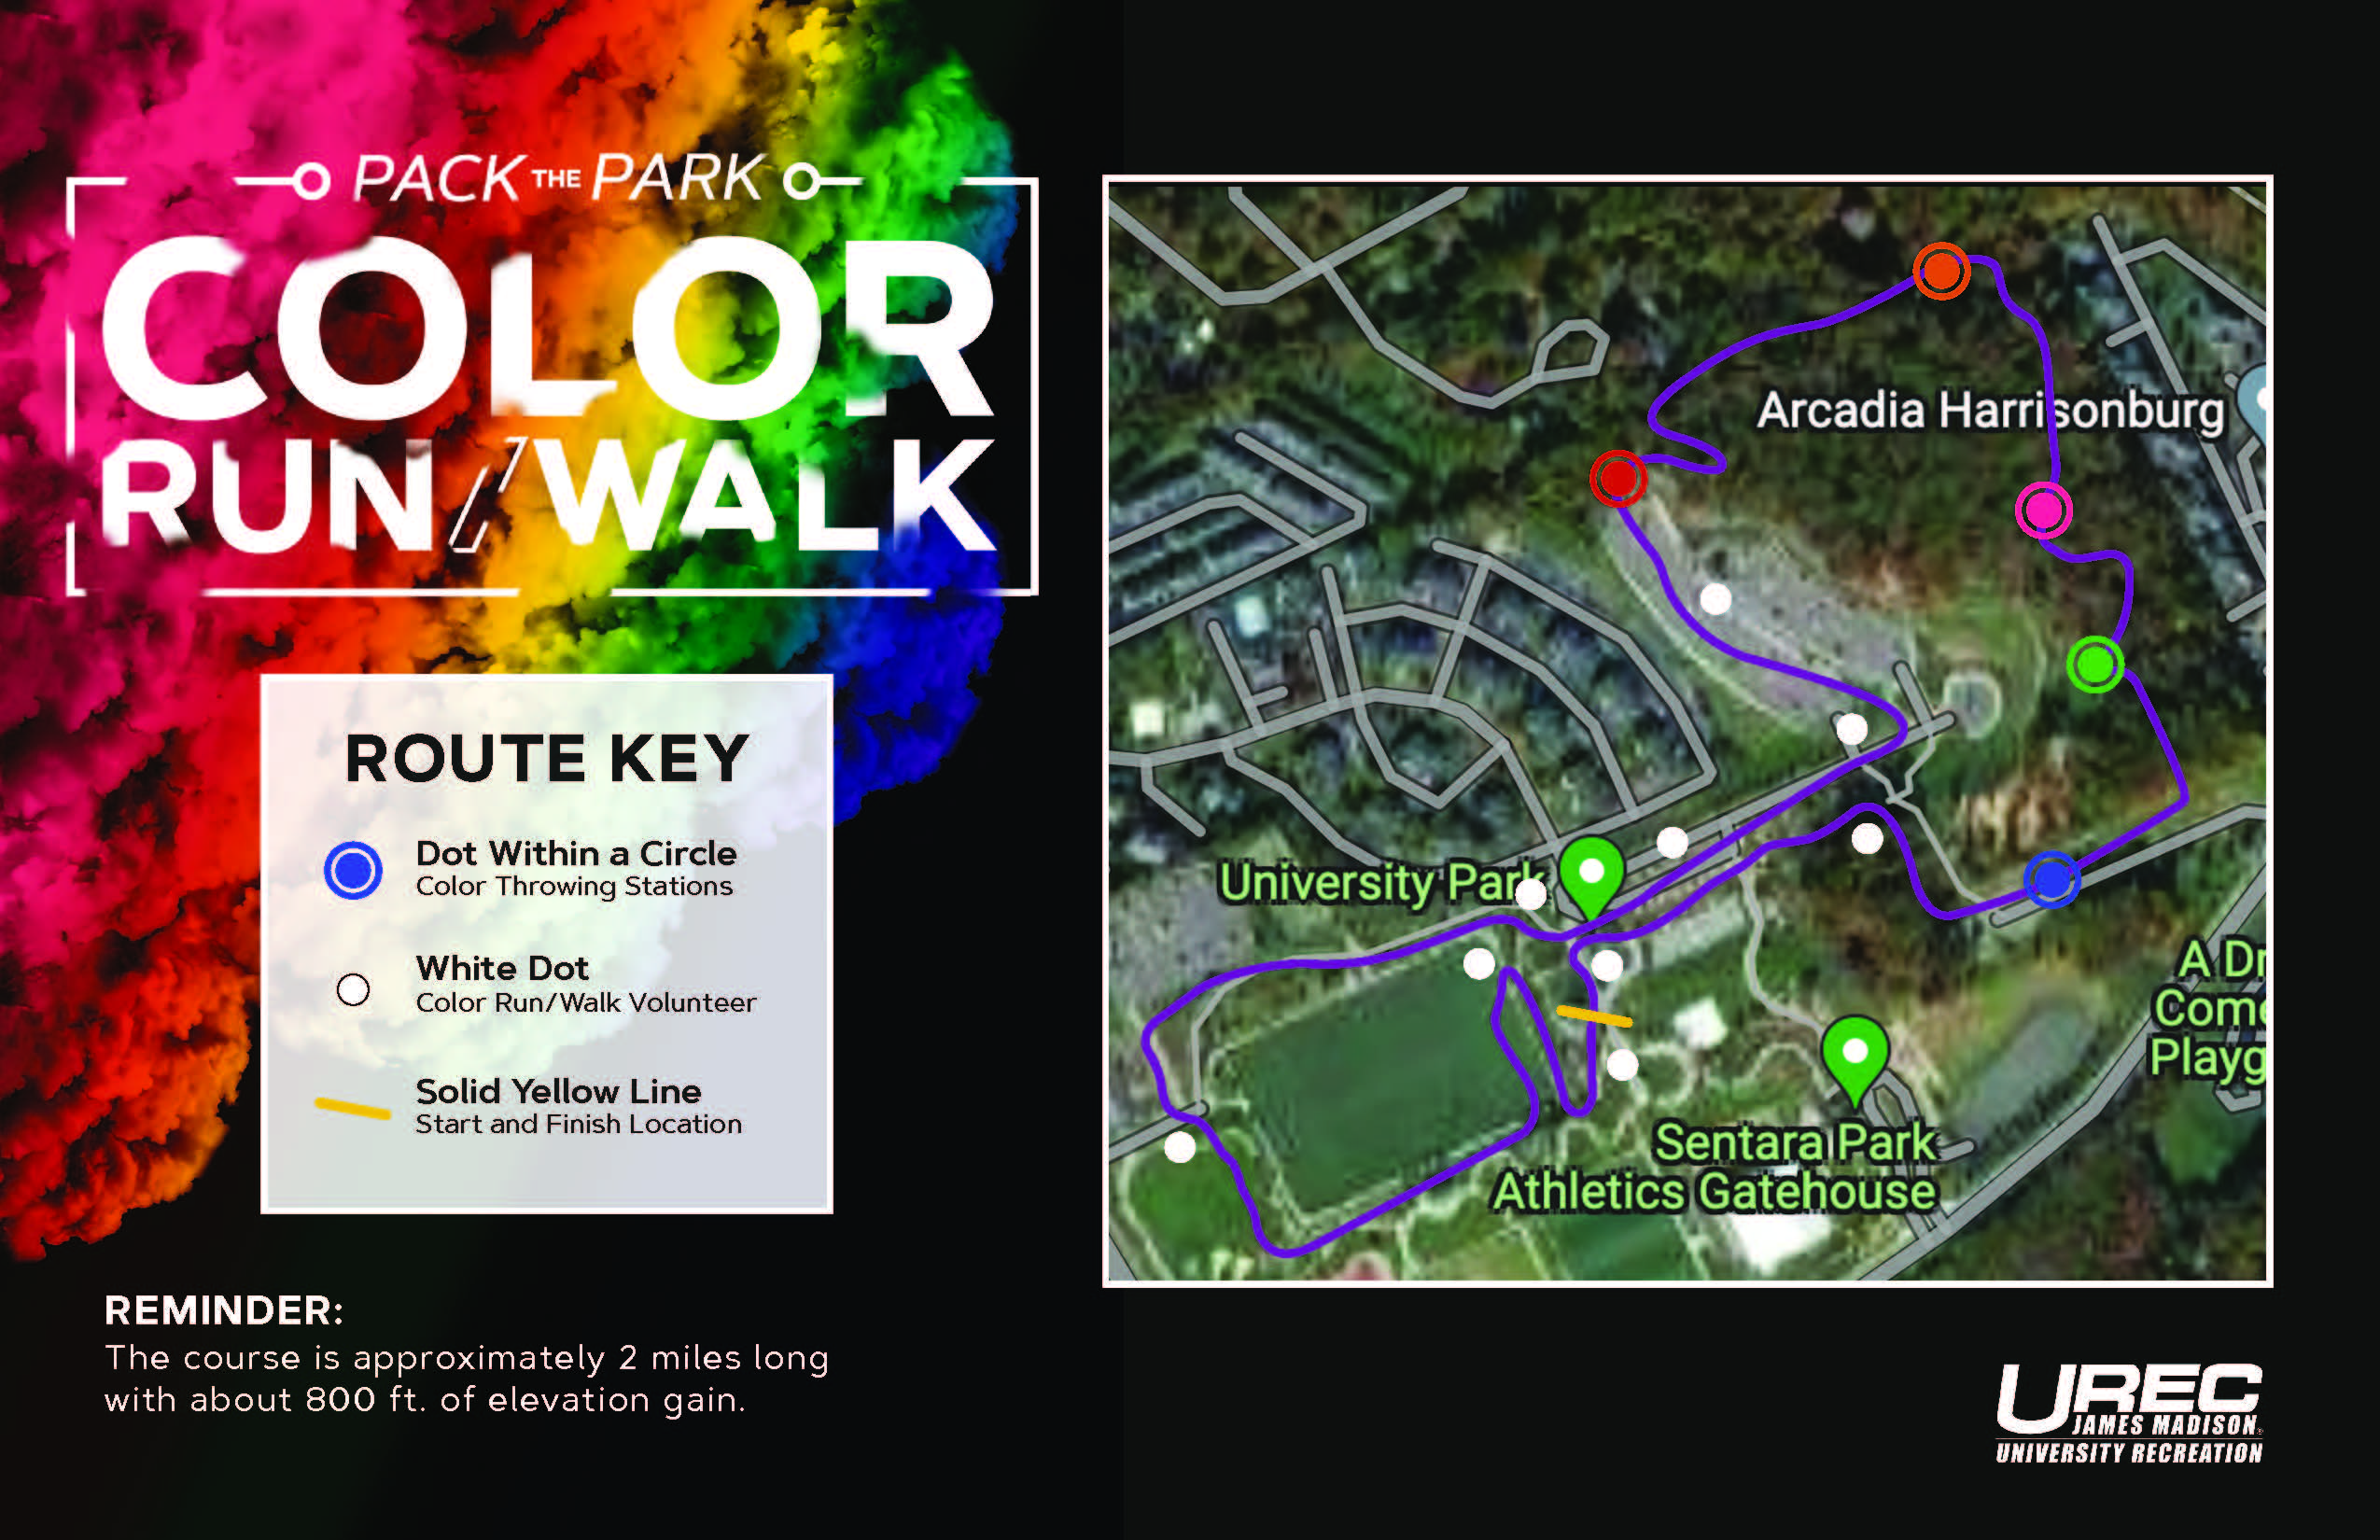 Map of the color run/walk 2 mile route